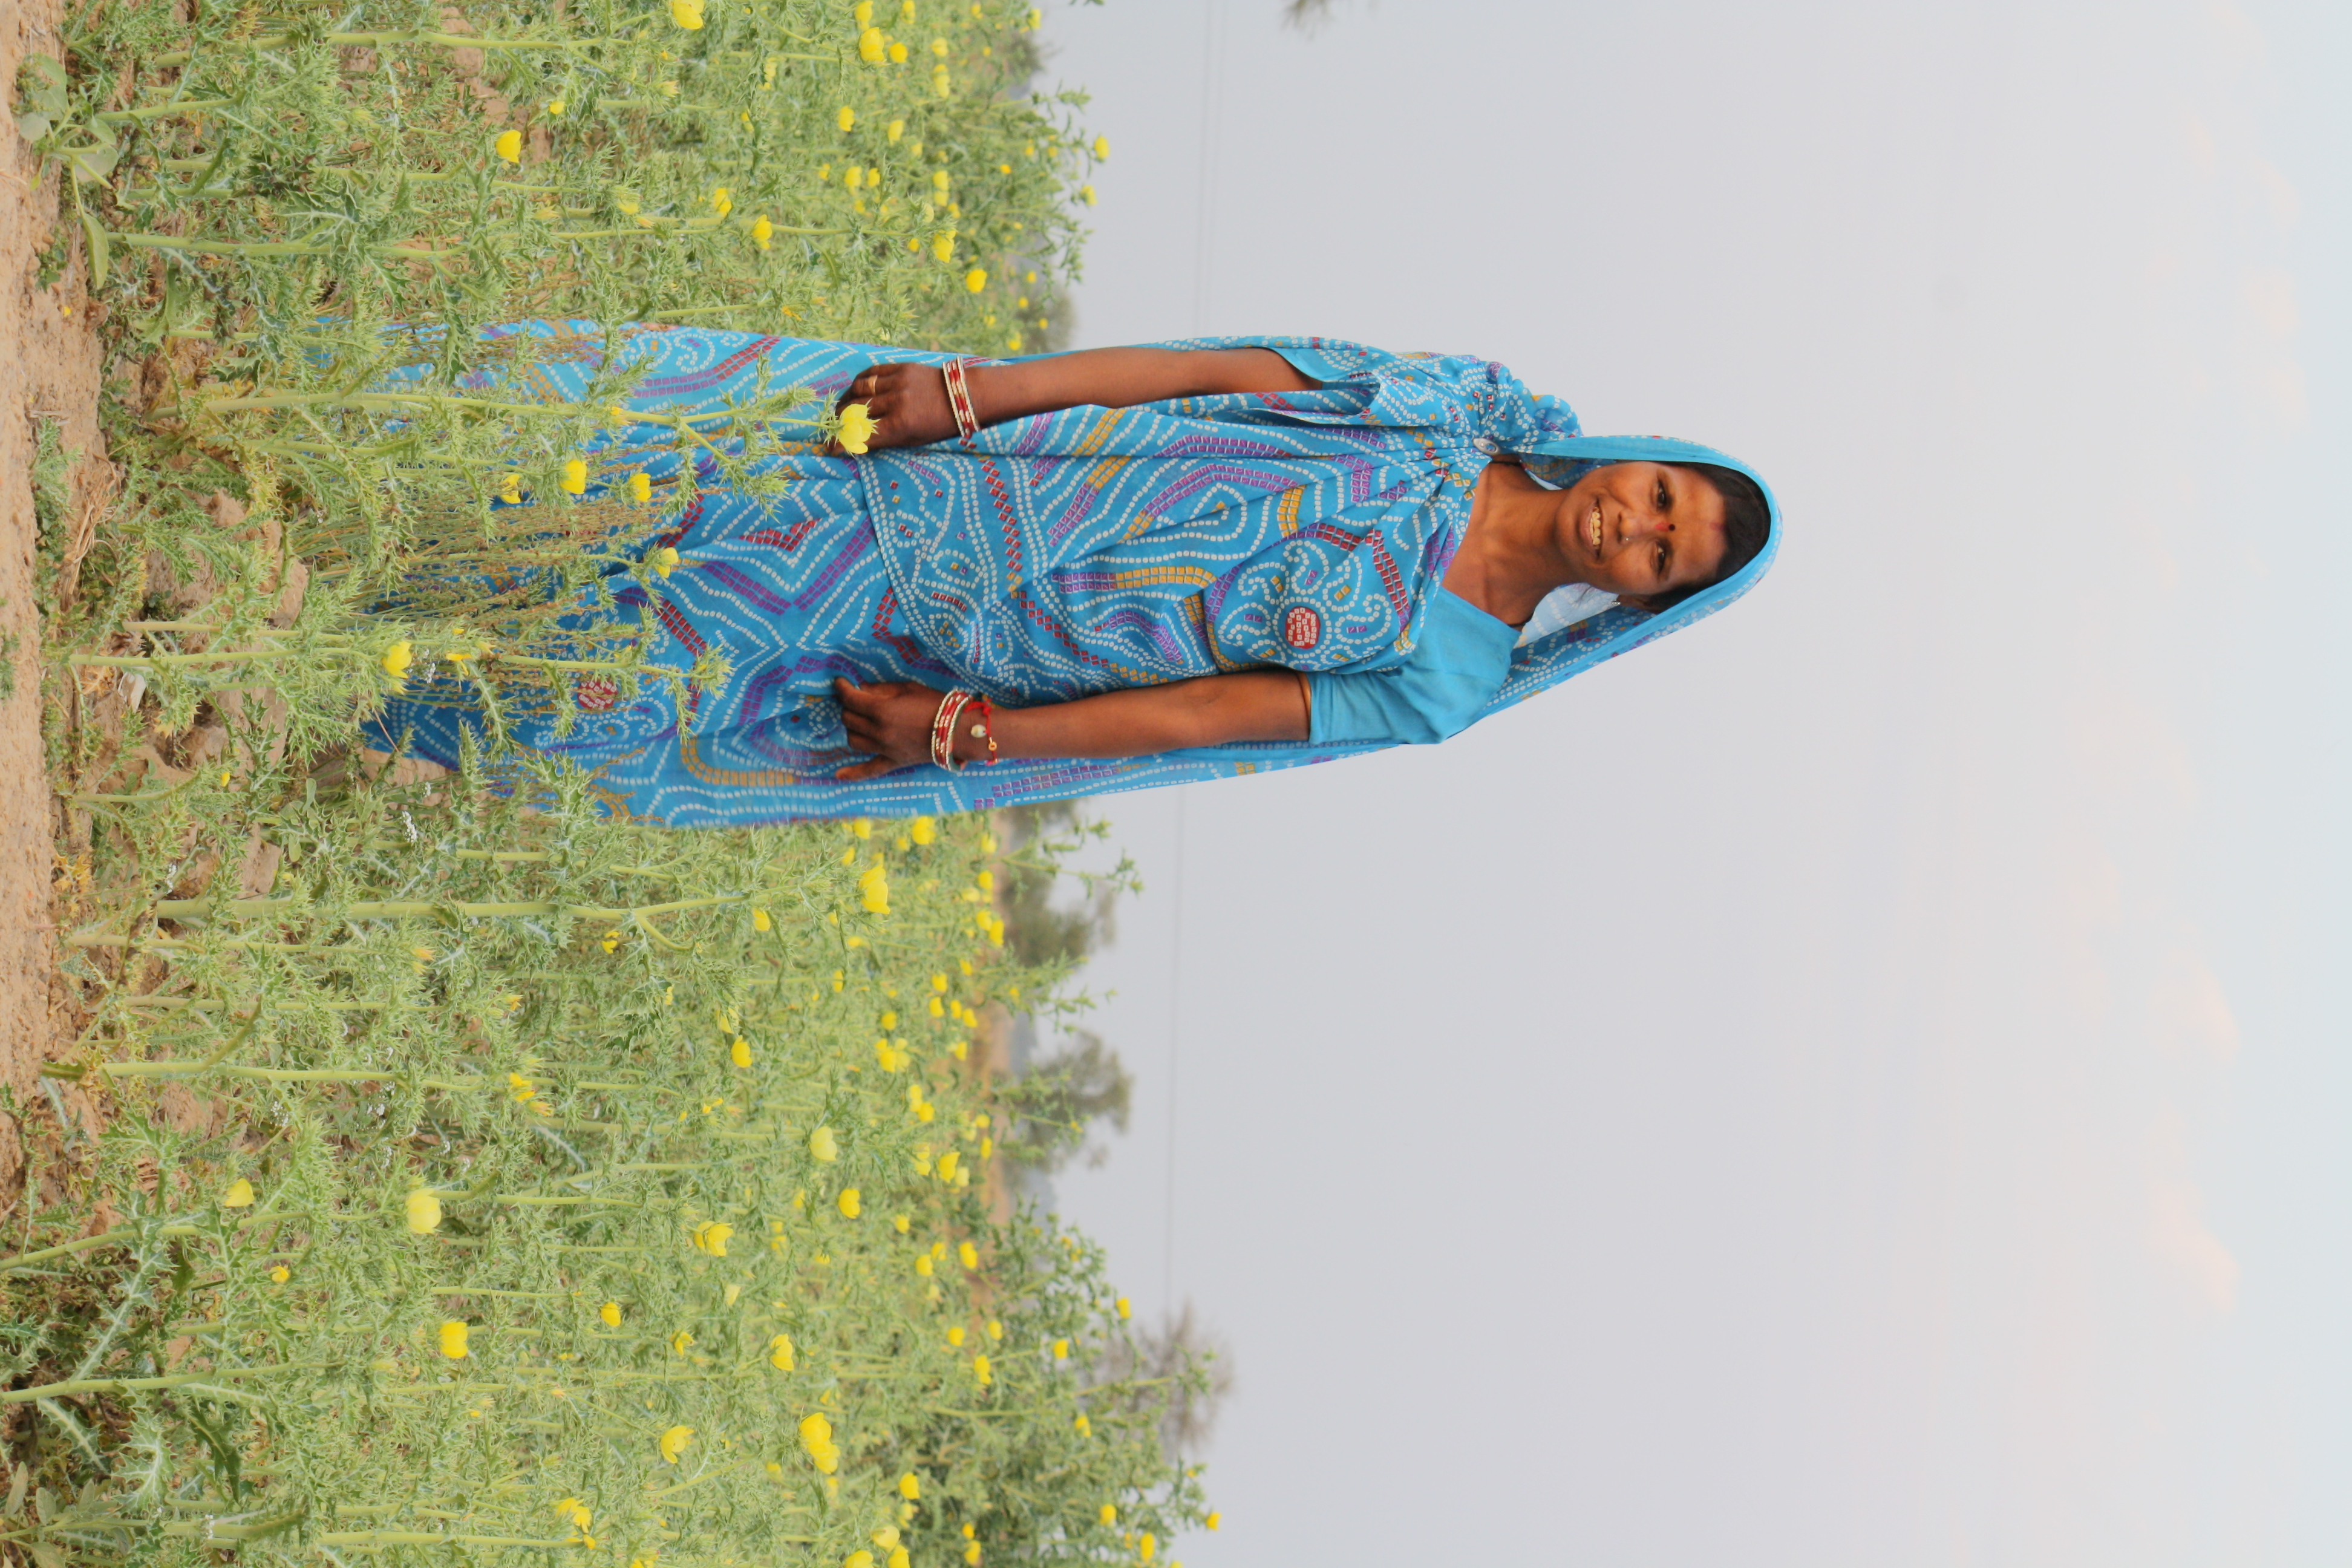 A first time village head, Badam Devi has made many positive changes in her community